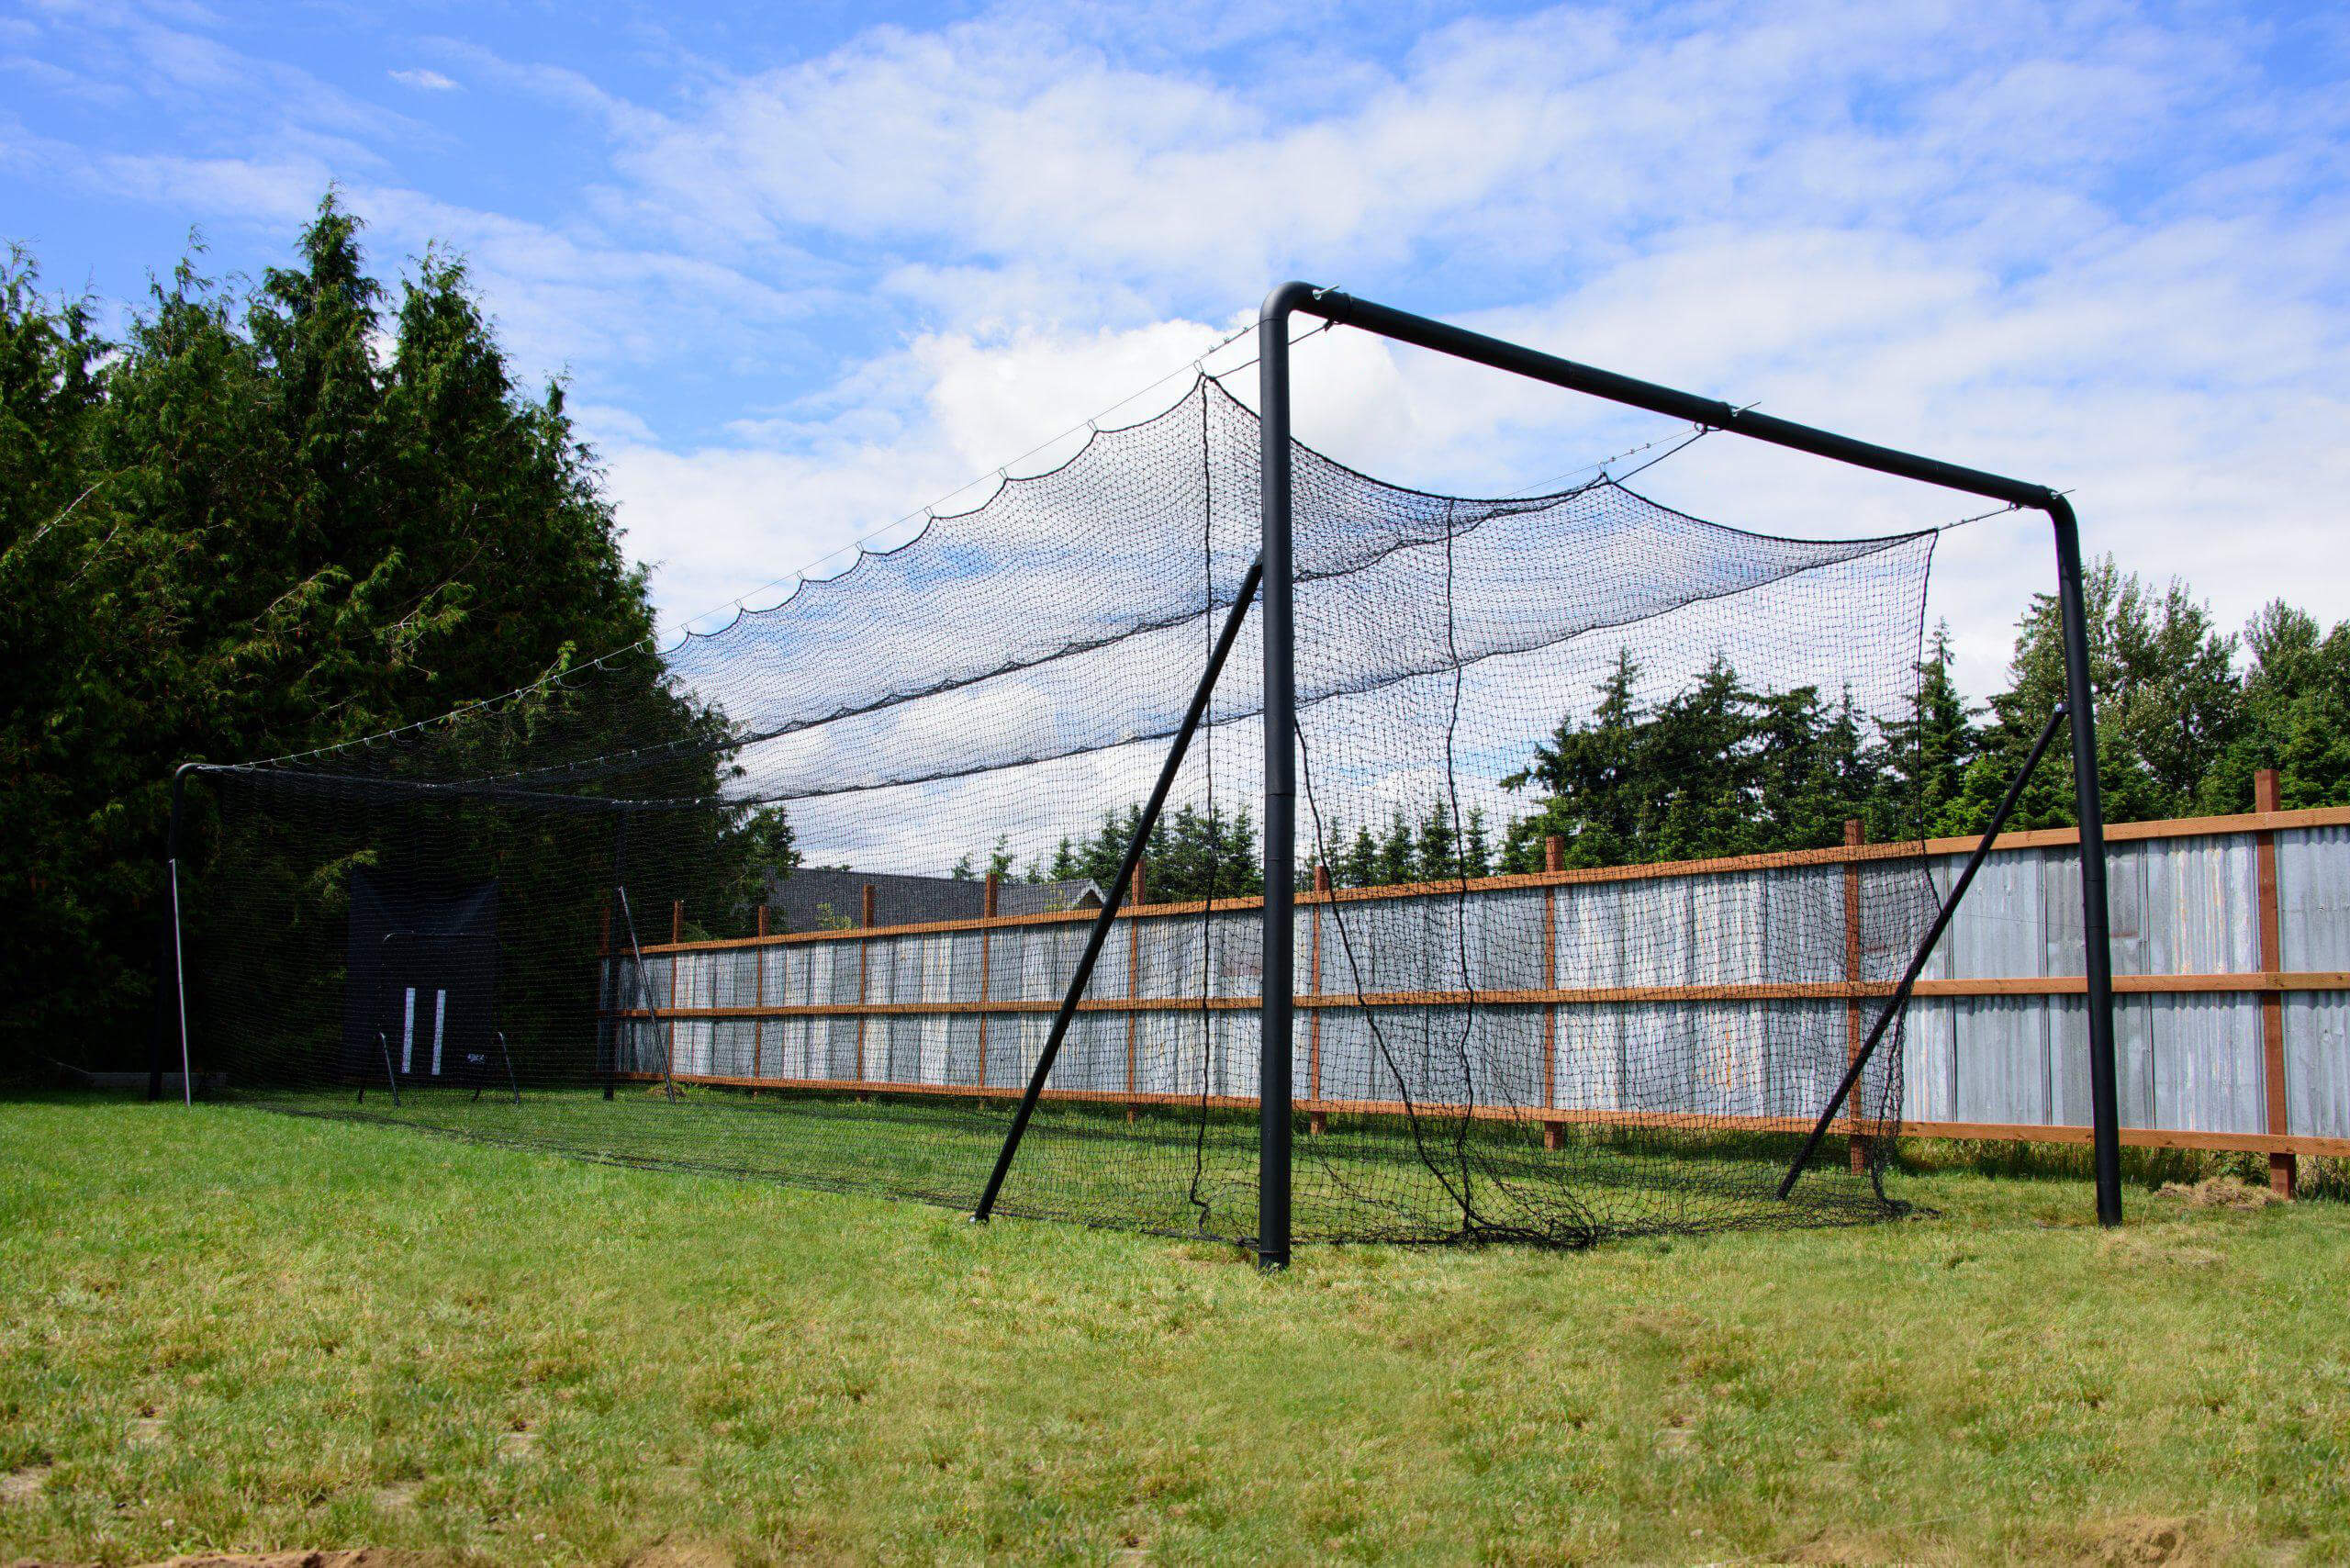 Iron Horse batting cage in backyard with fence, grass, trees, and blue skies